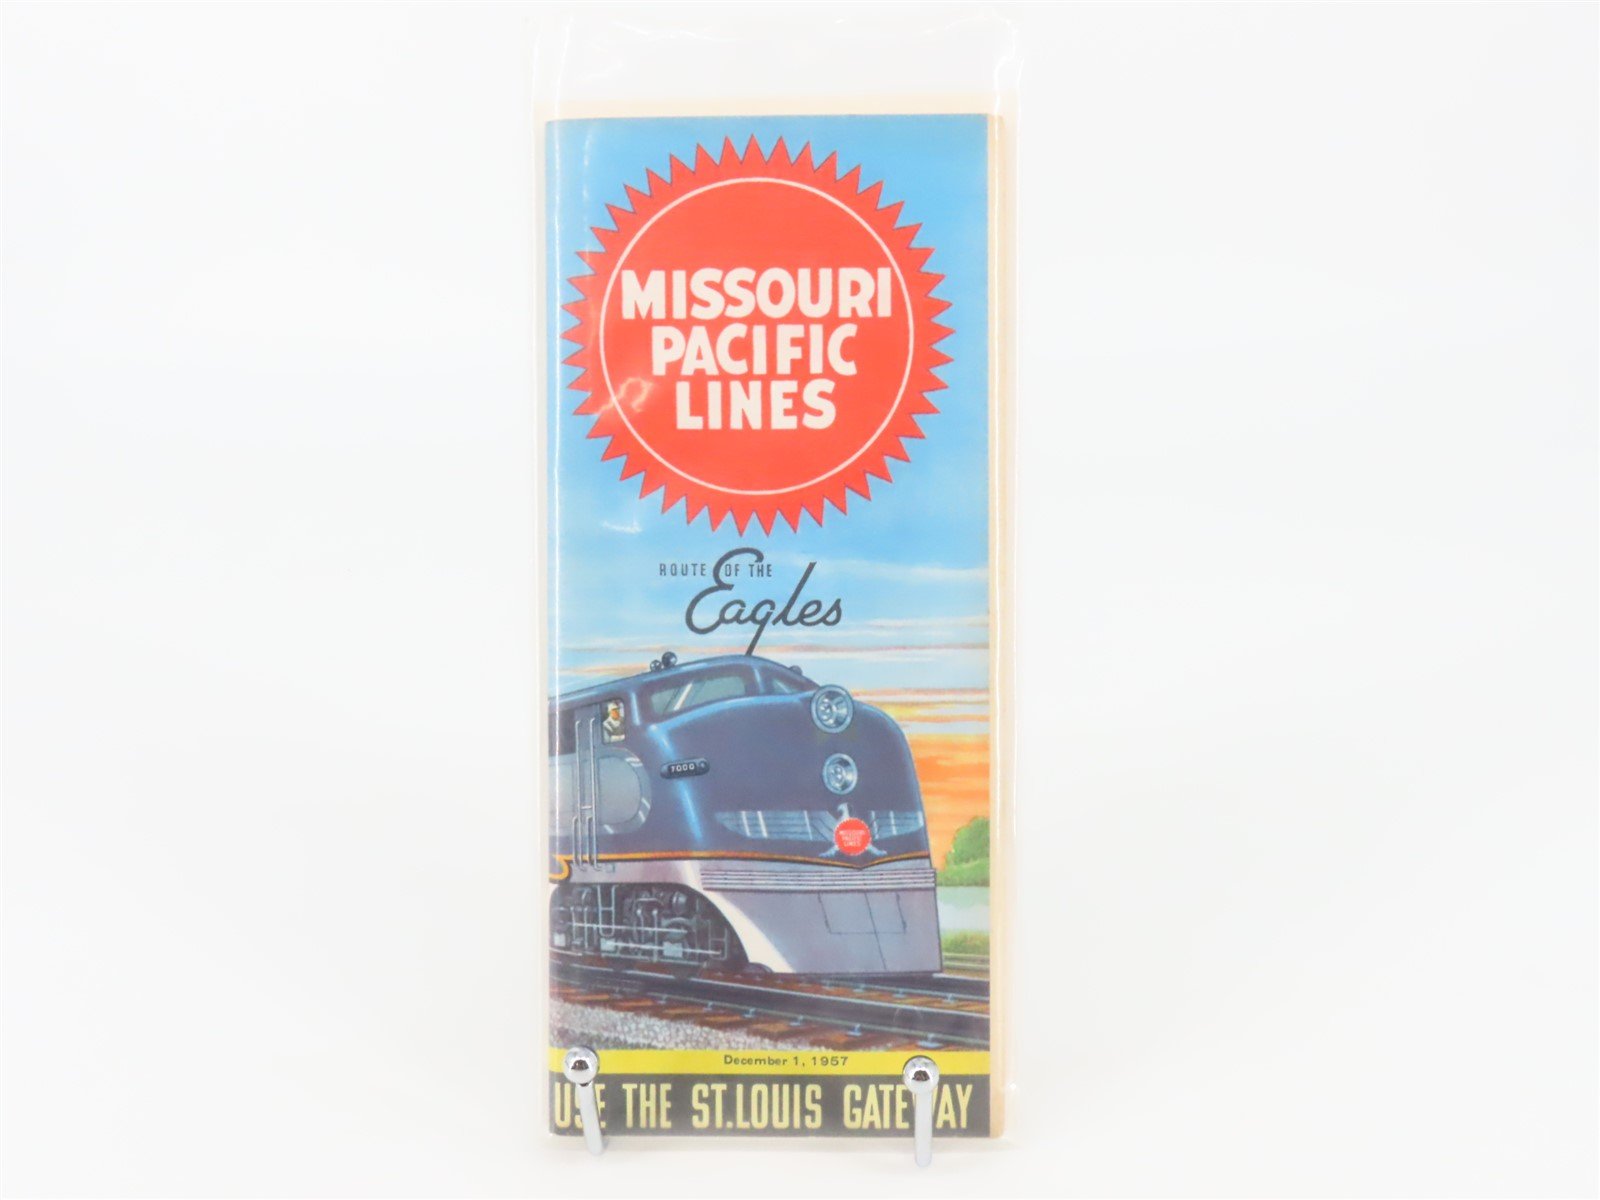 MP Missouri Pacific Lines "Route of the Eagles" Time Tables: December 1, 1957